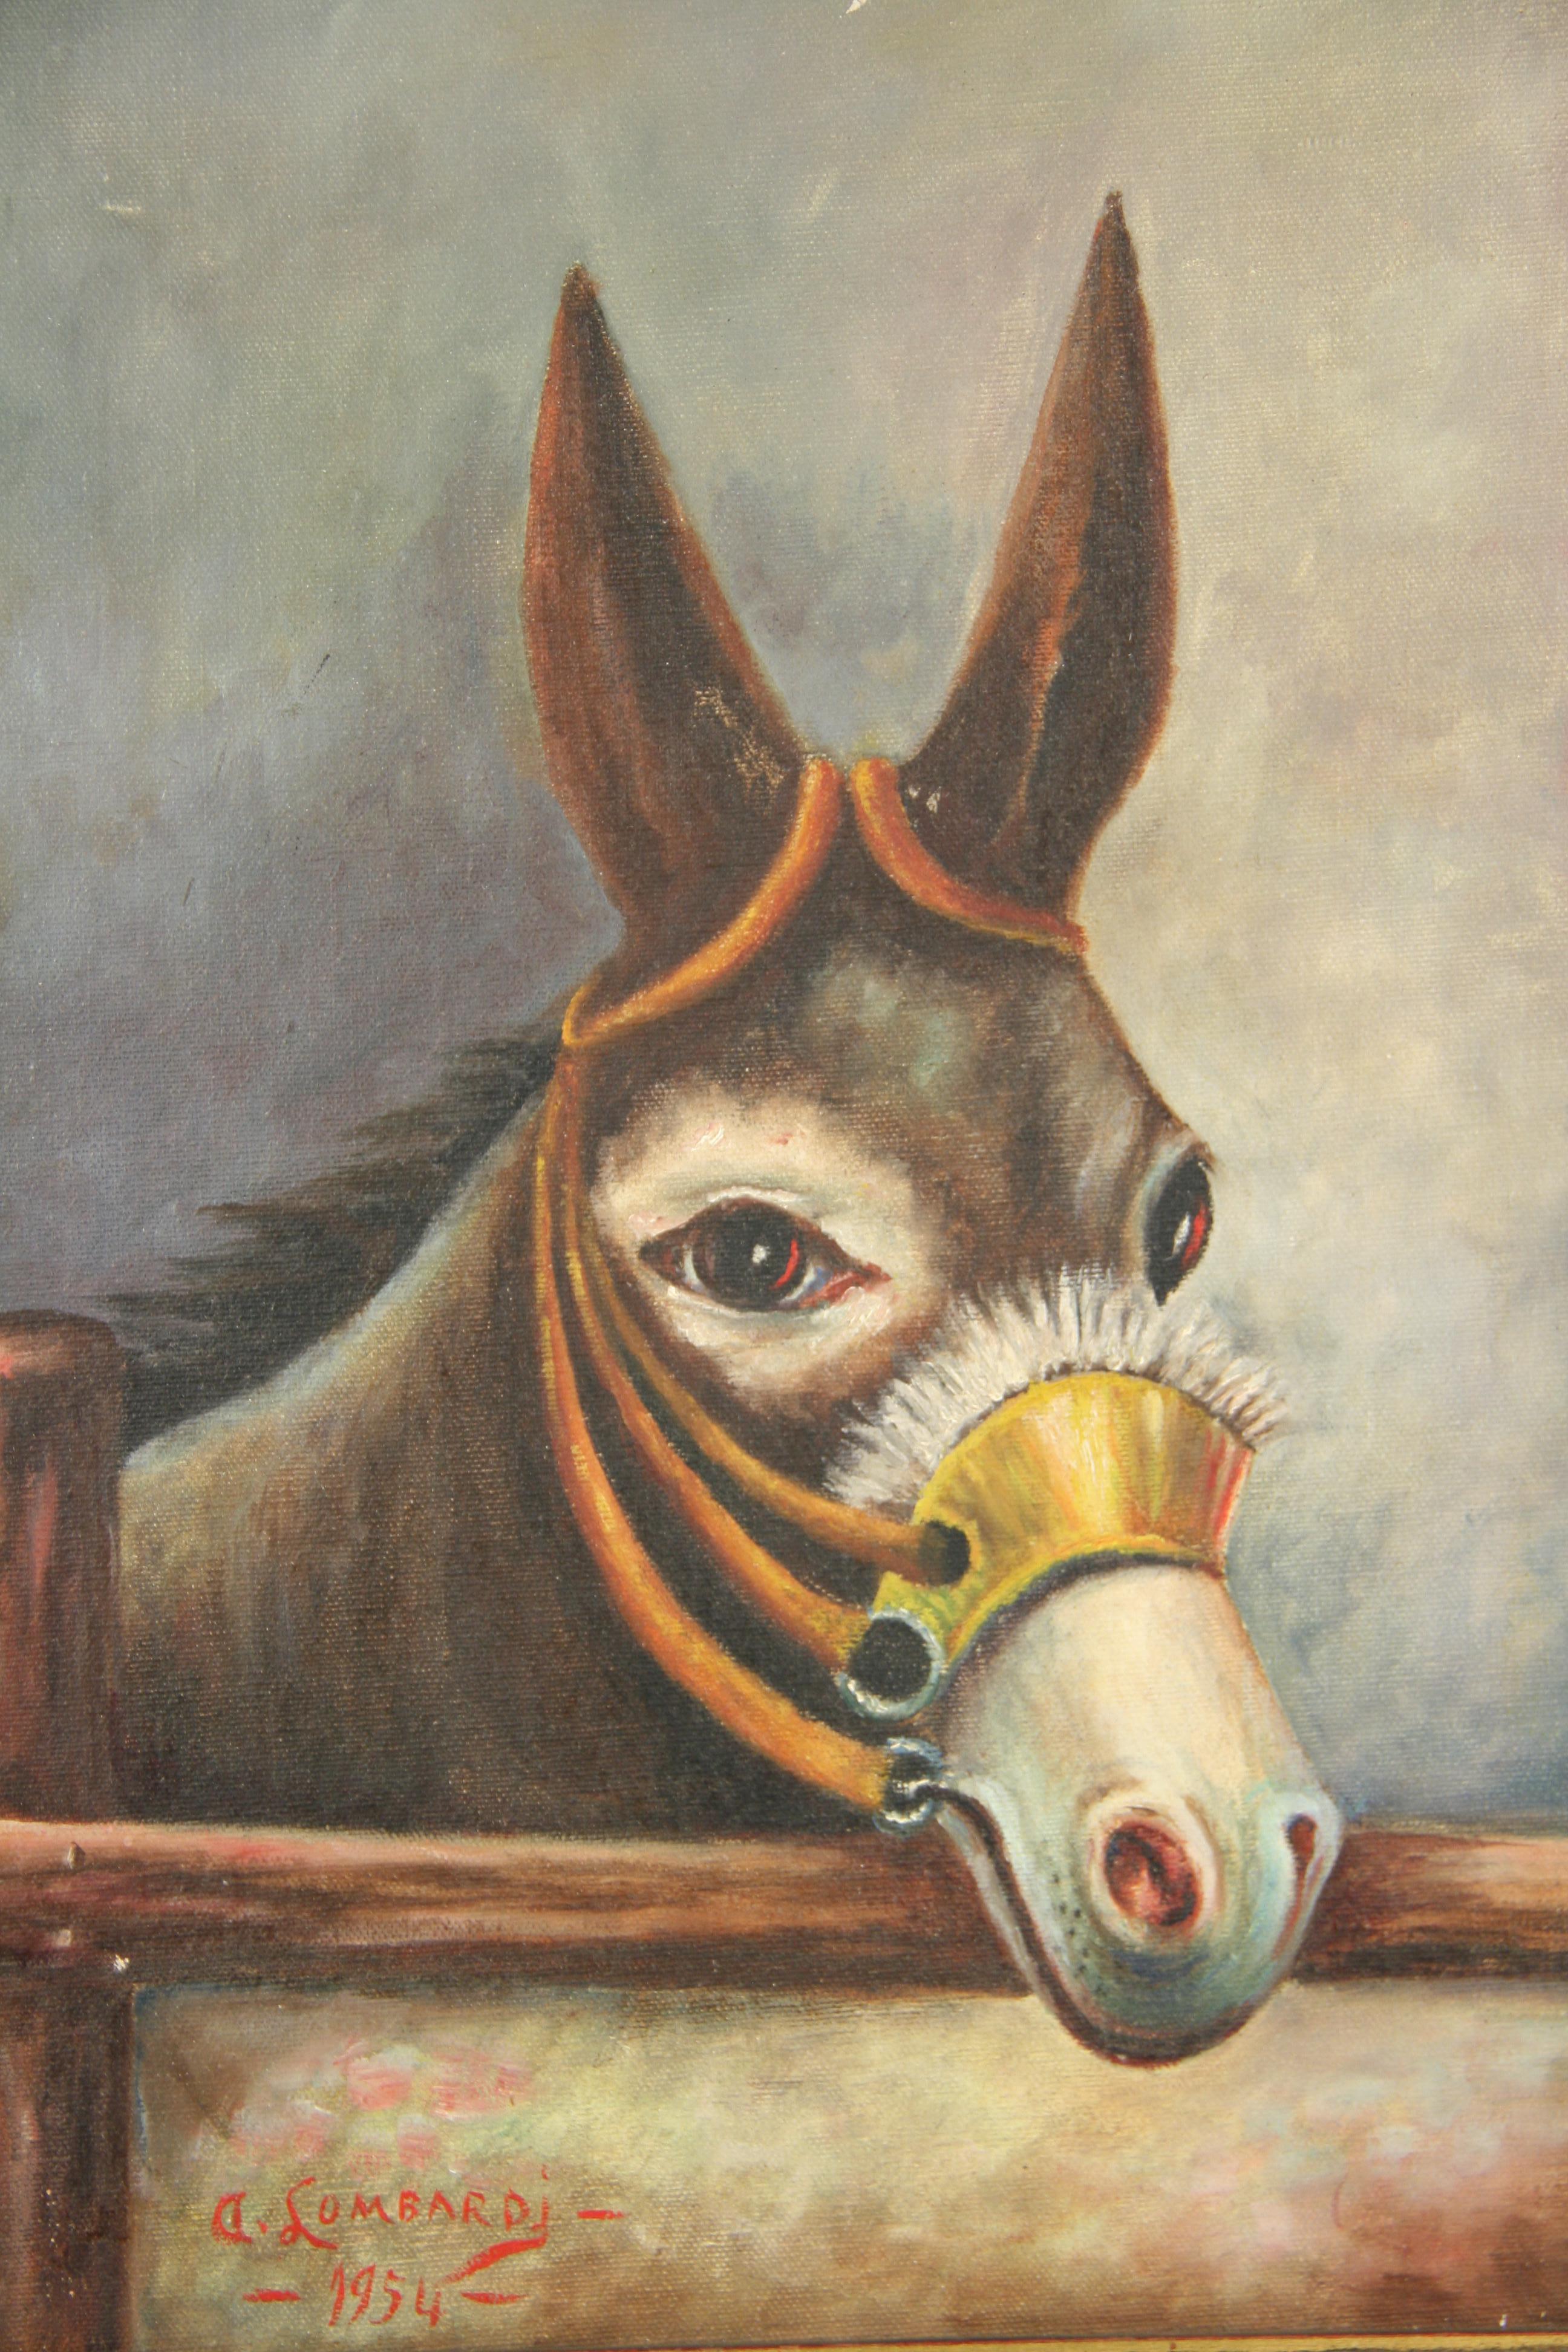 #5-2992 Stella a female donkey, oil on canvas applied to a board, displayed in a gilt wood frame, signed lower left by A.Lombardi 1954